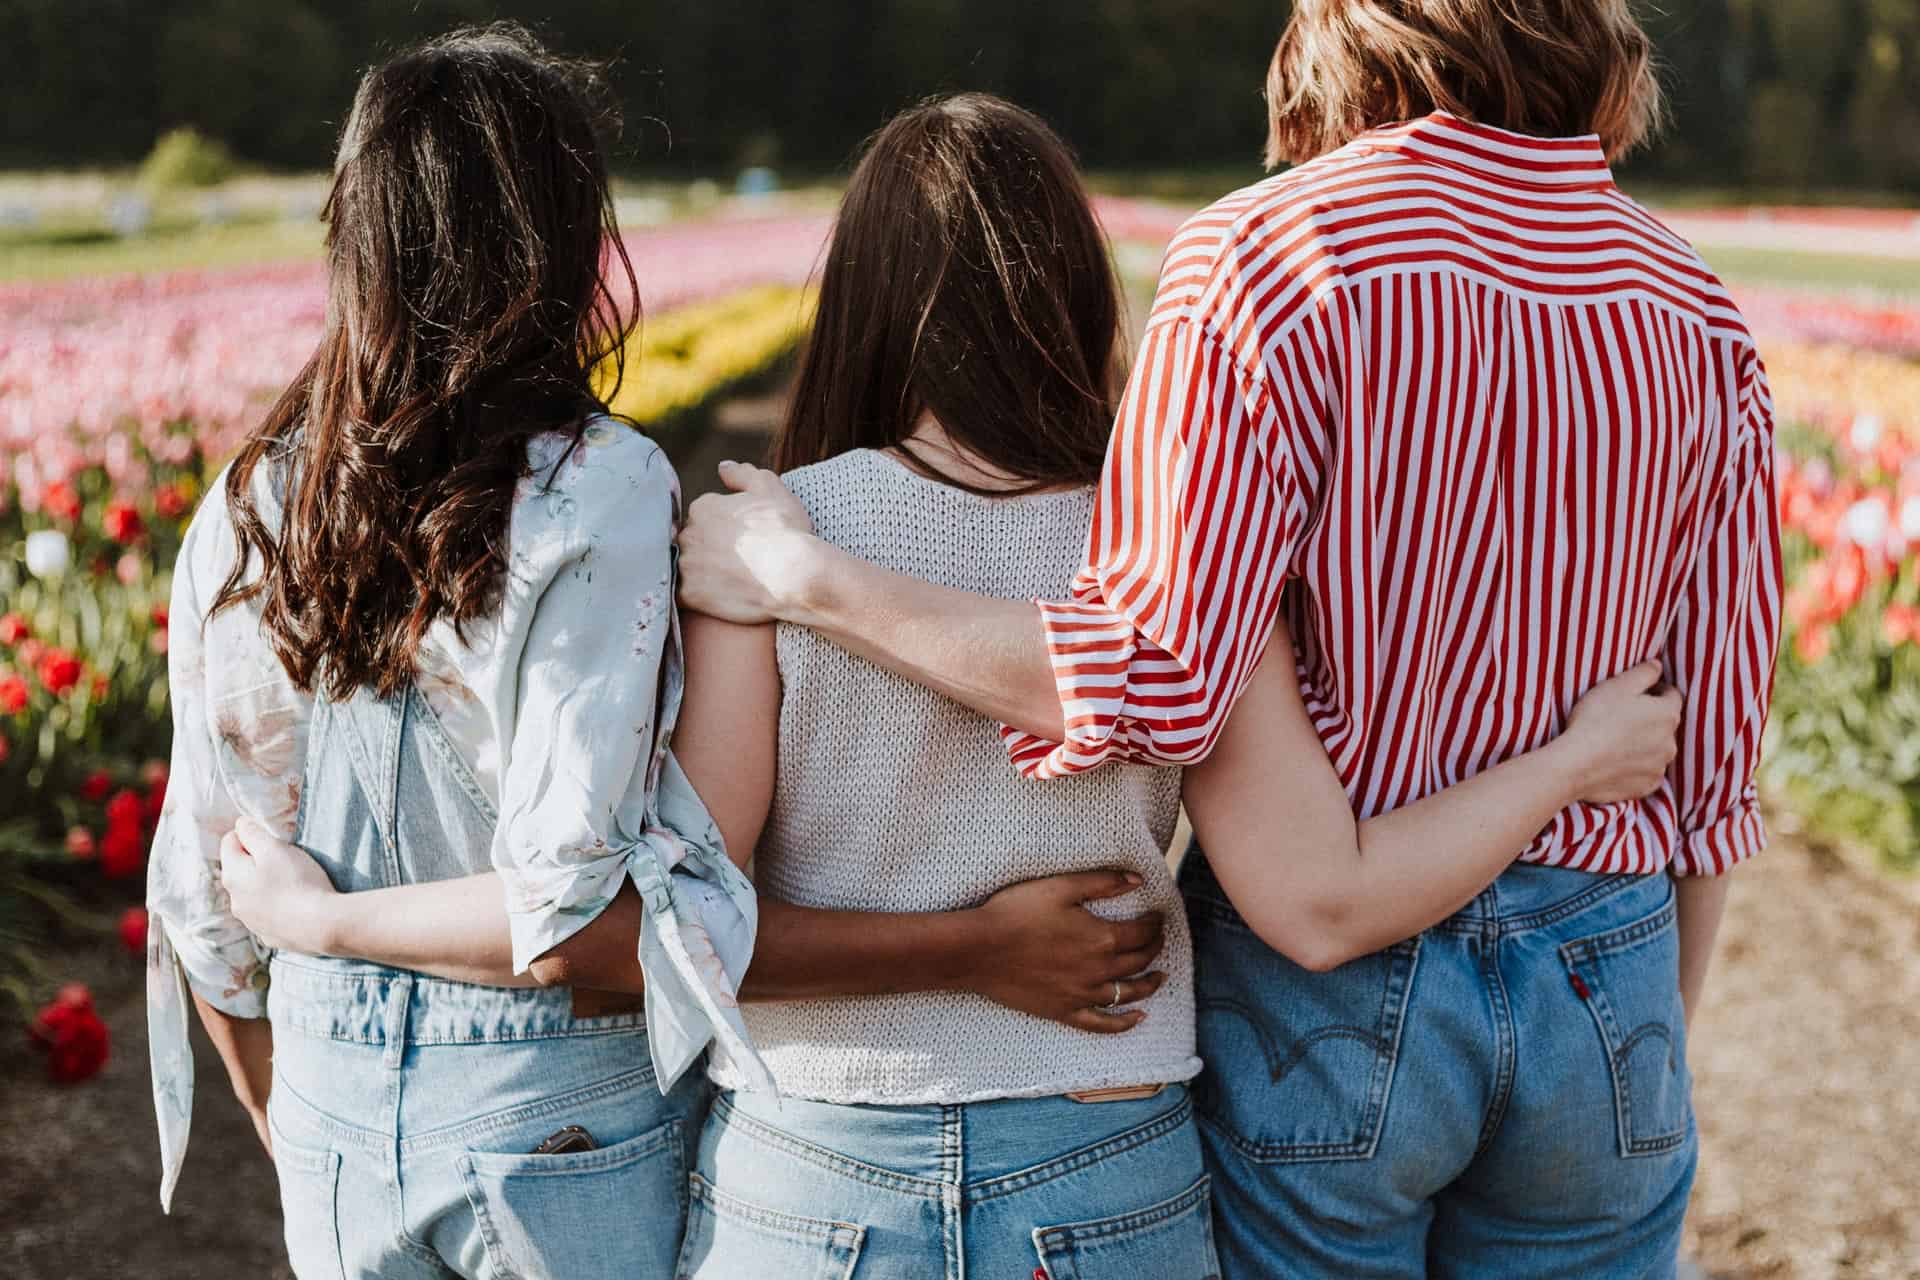 hugging friends; how to love others according to the bible